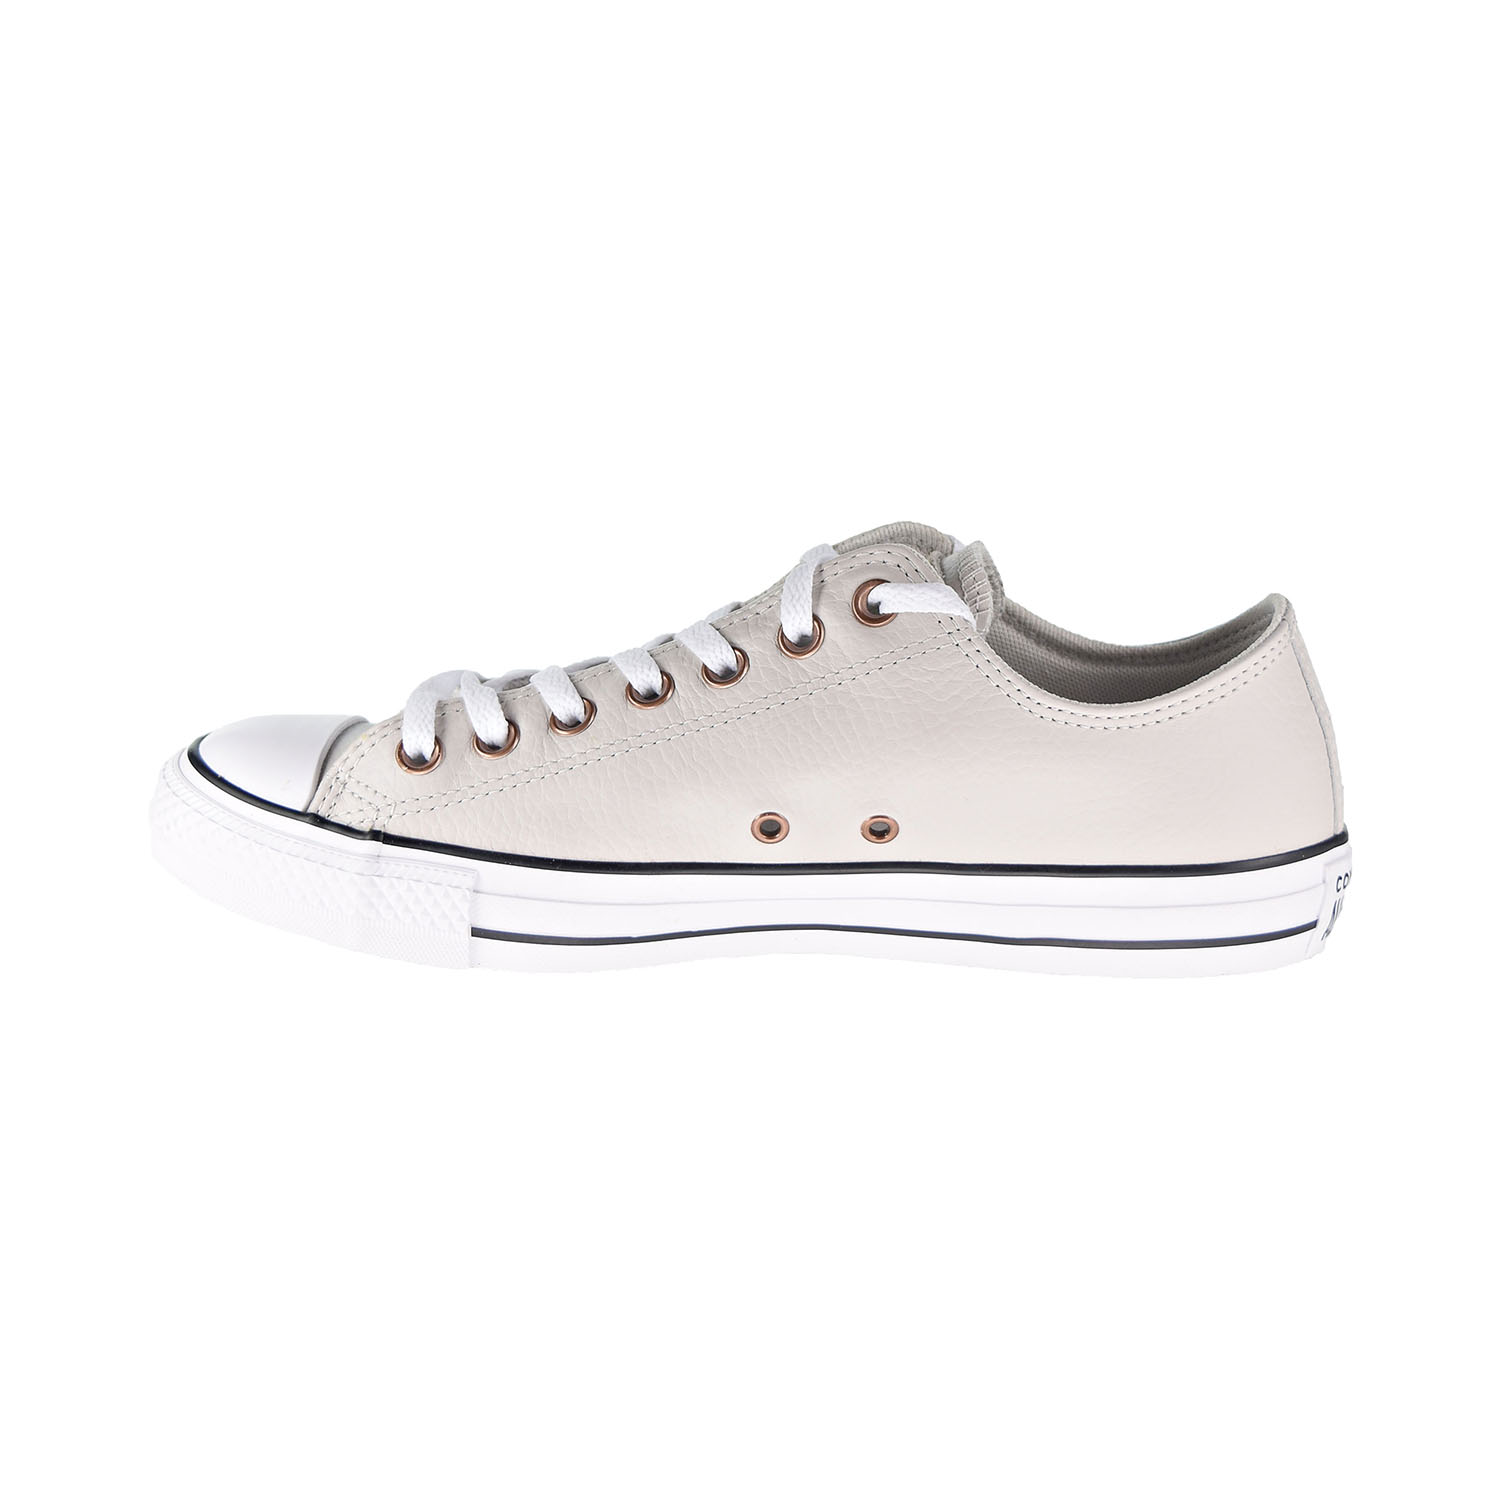 Converse Chuck Taylor All Star Ox Men's Shoes Pale Putty-White-Black 165194c - image 4 of 6